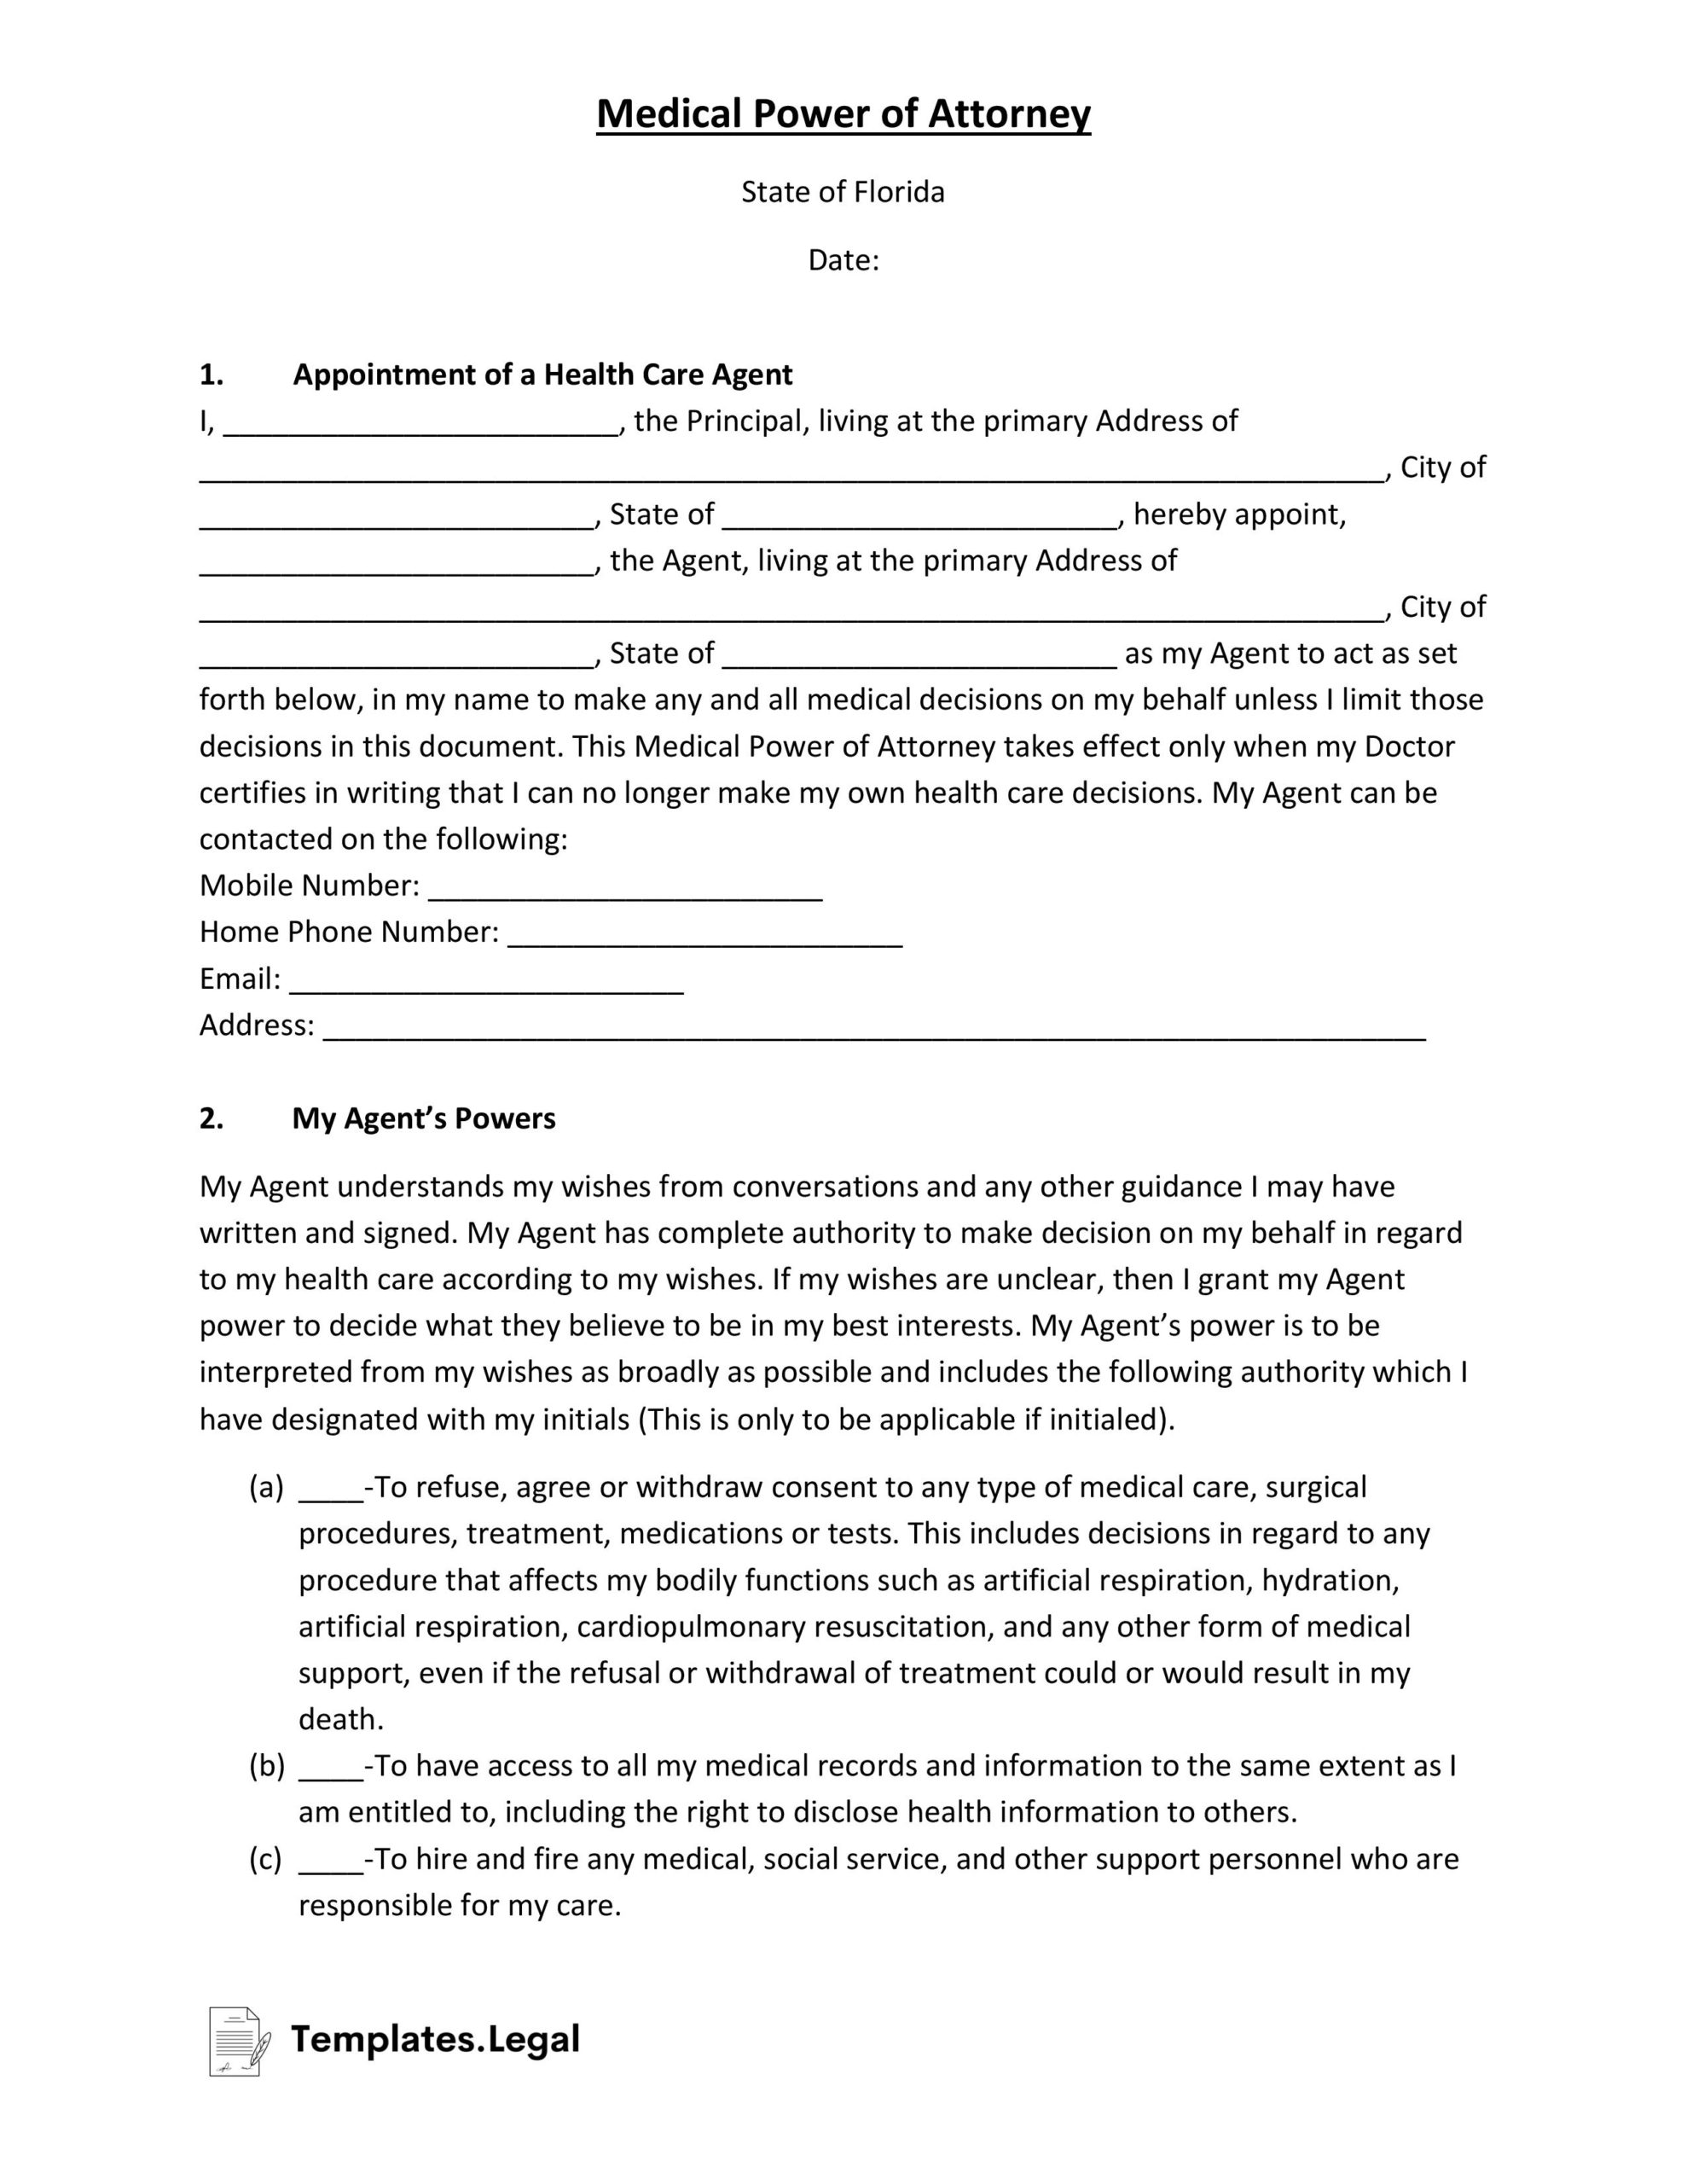 Florida Medical Power of Attorney- Templates.Legal